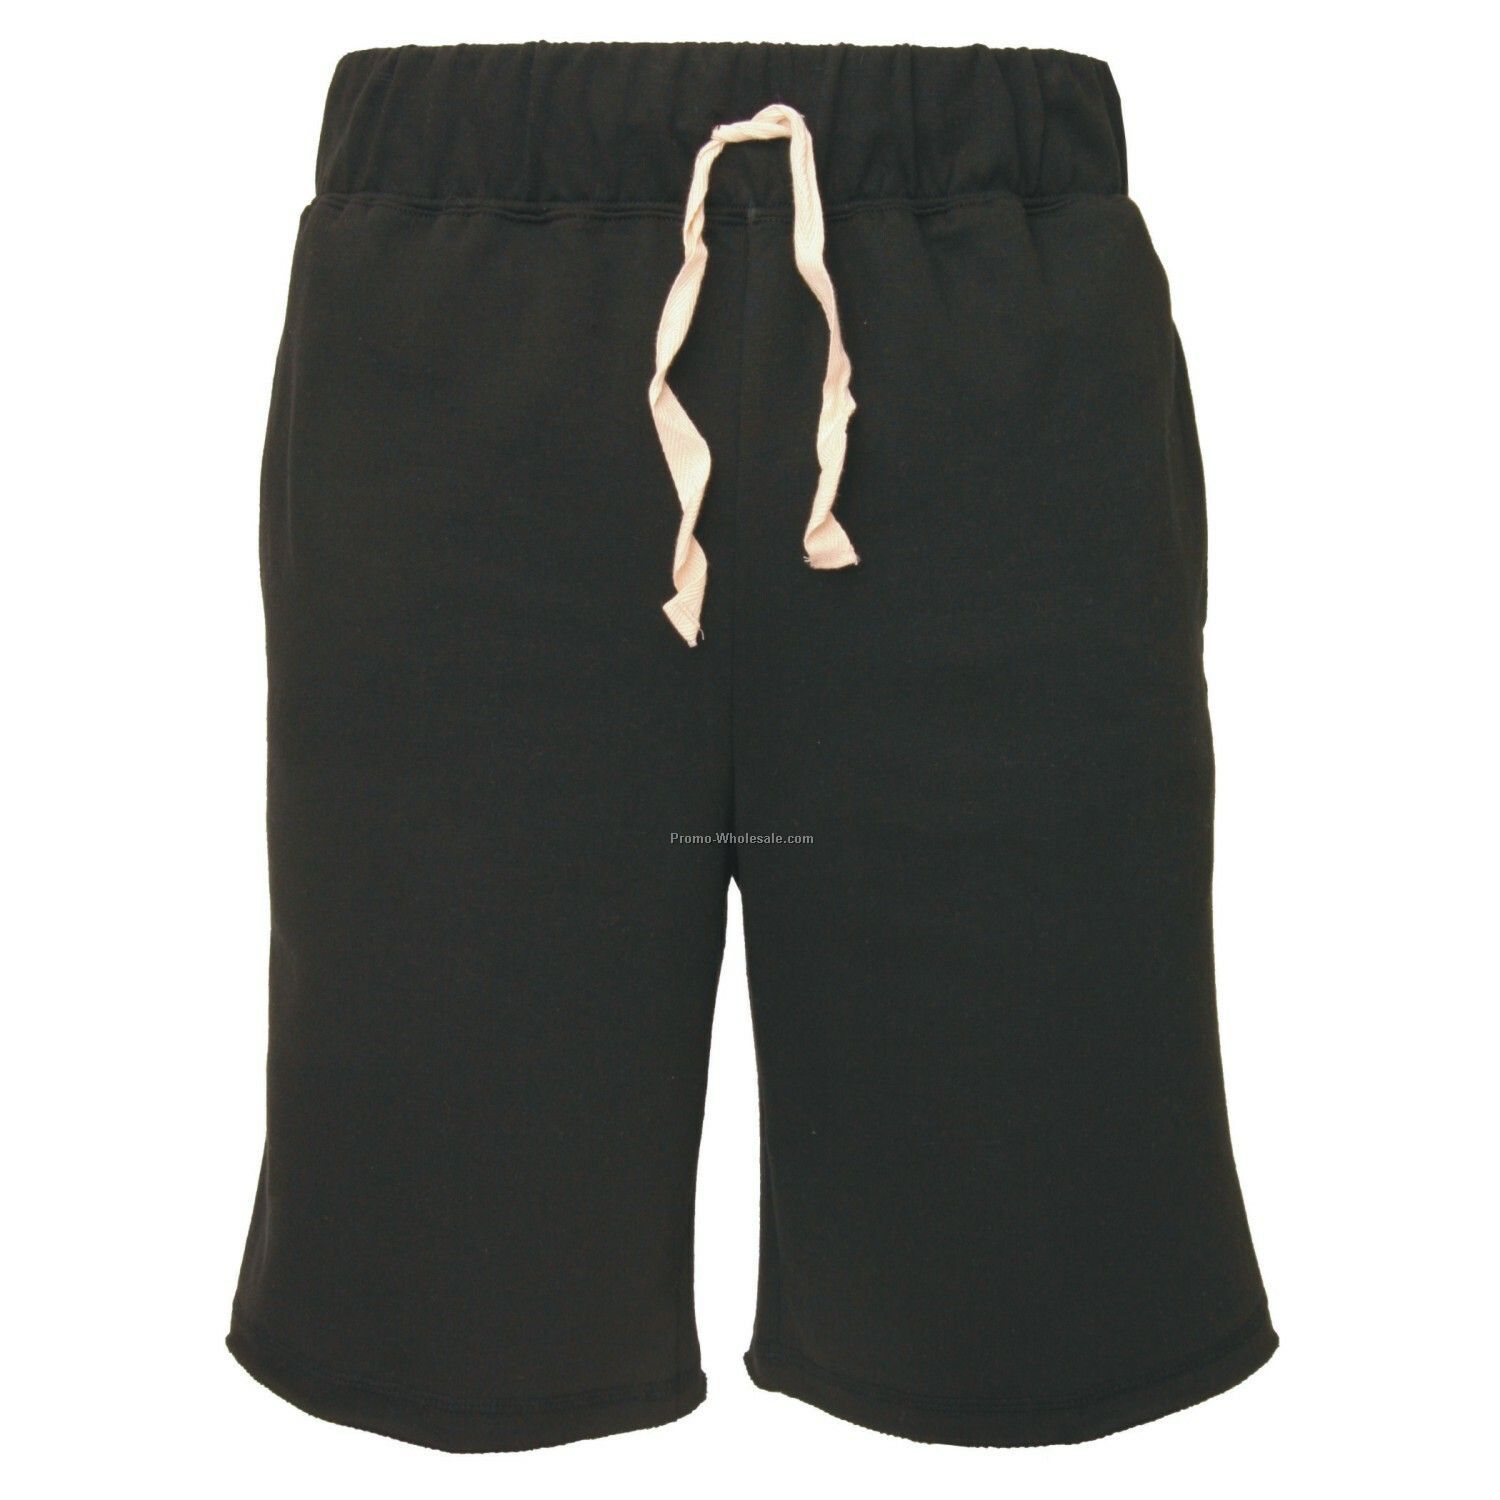 Adults' Black First Place Fleece Shorts With 2 Side Pockets (2xl)